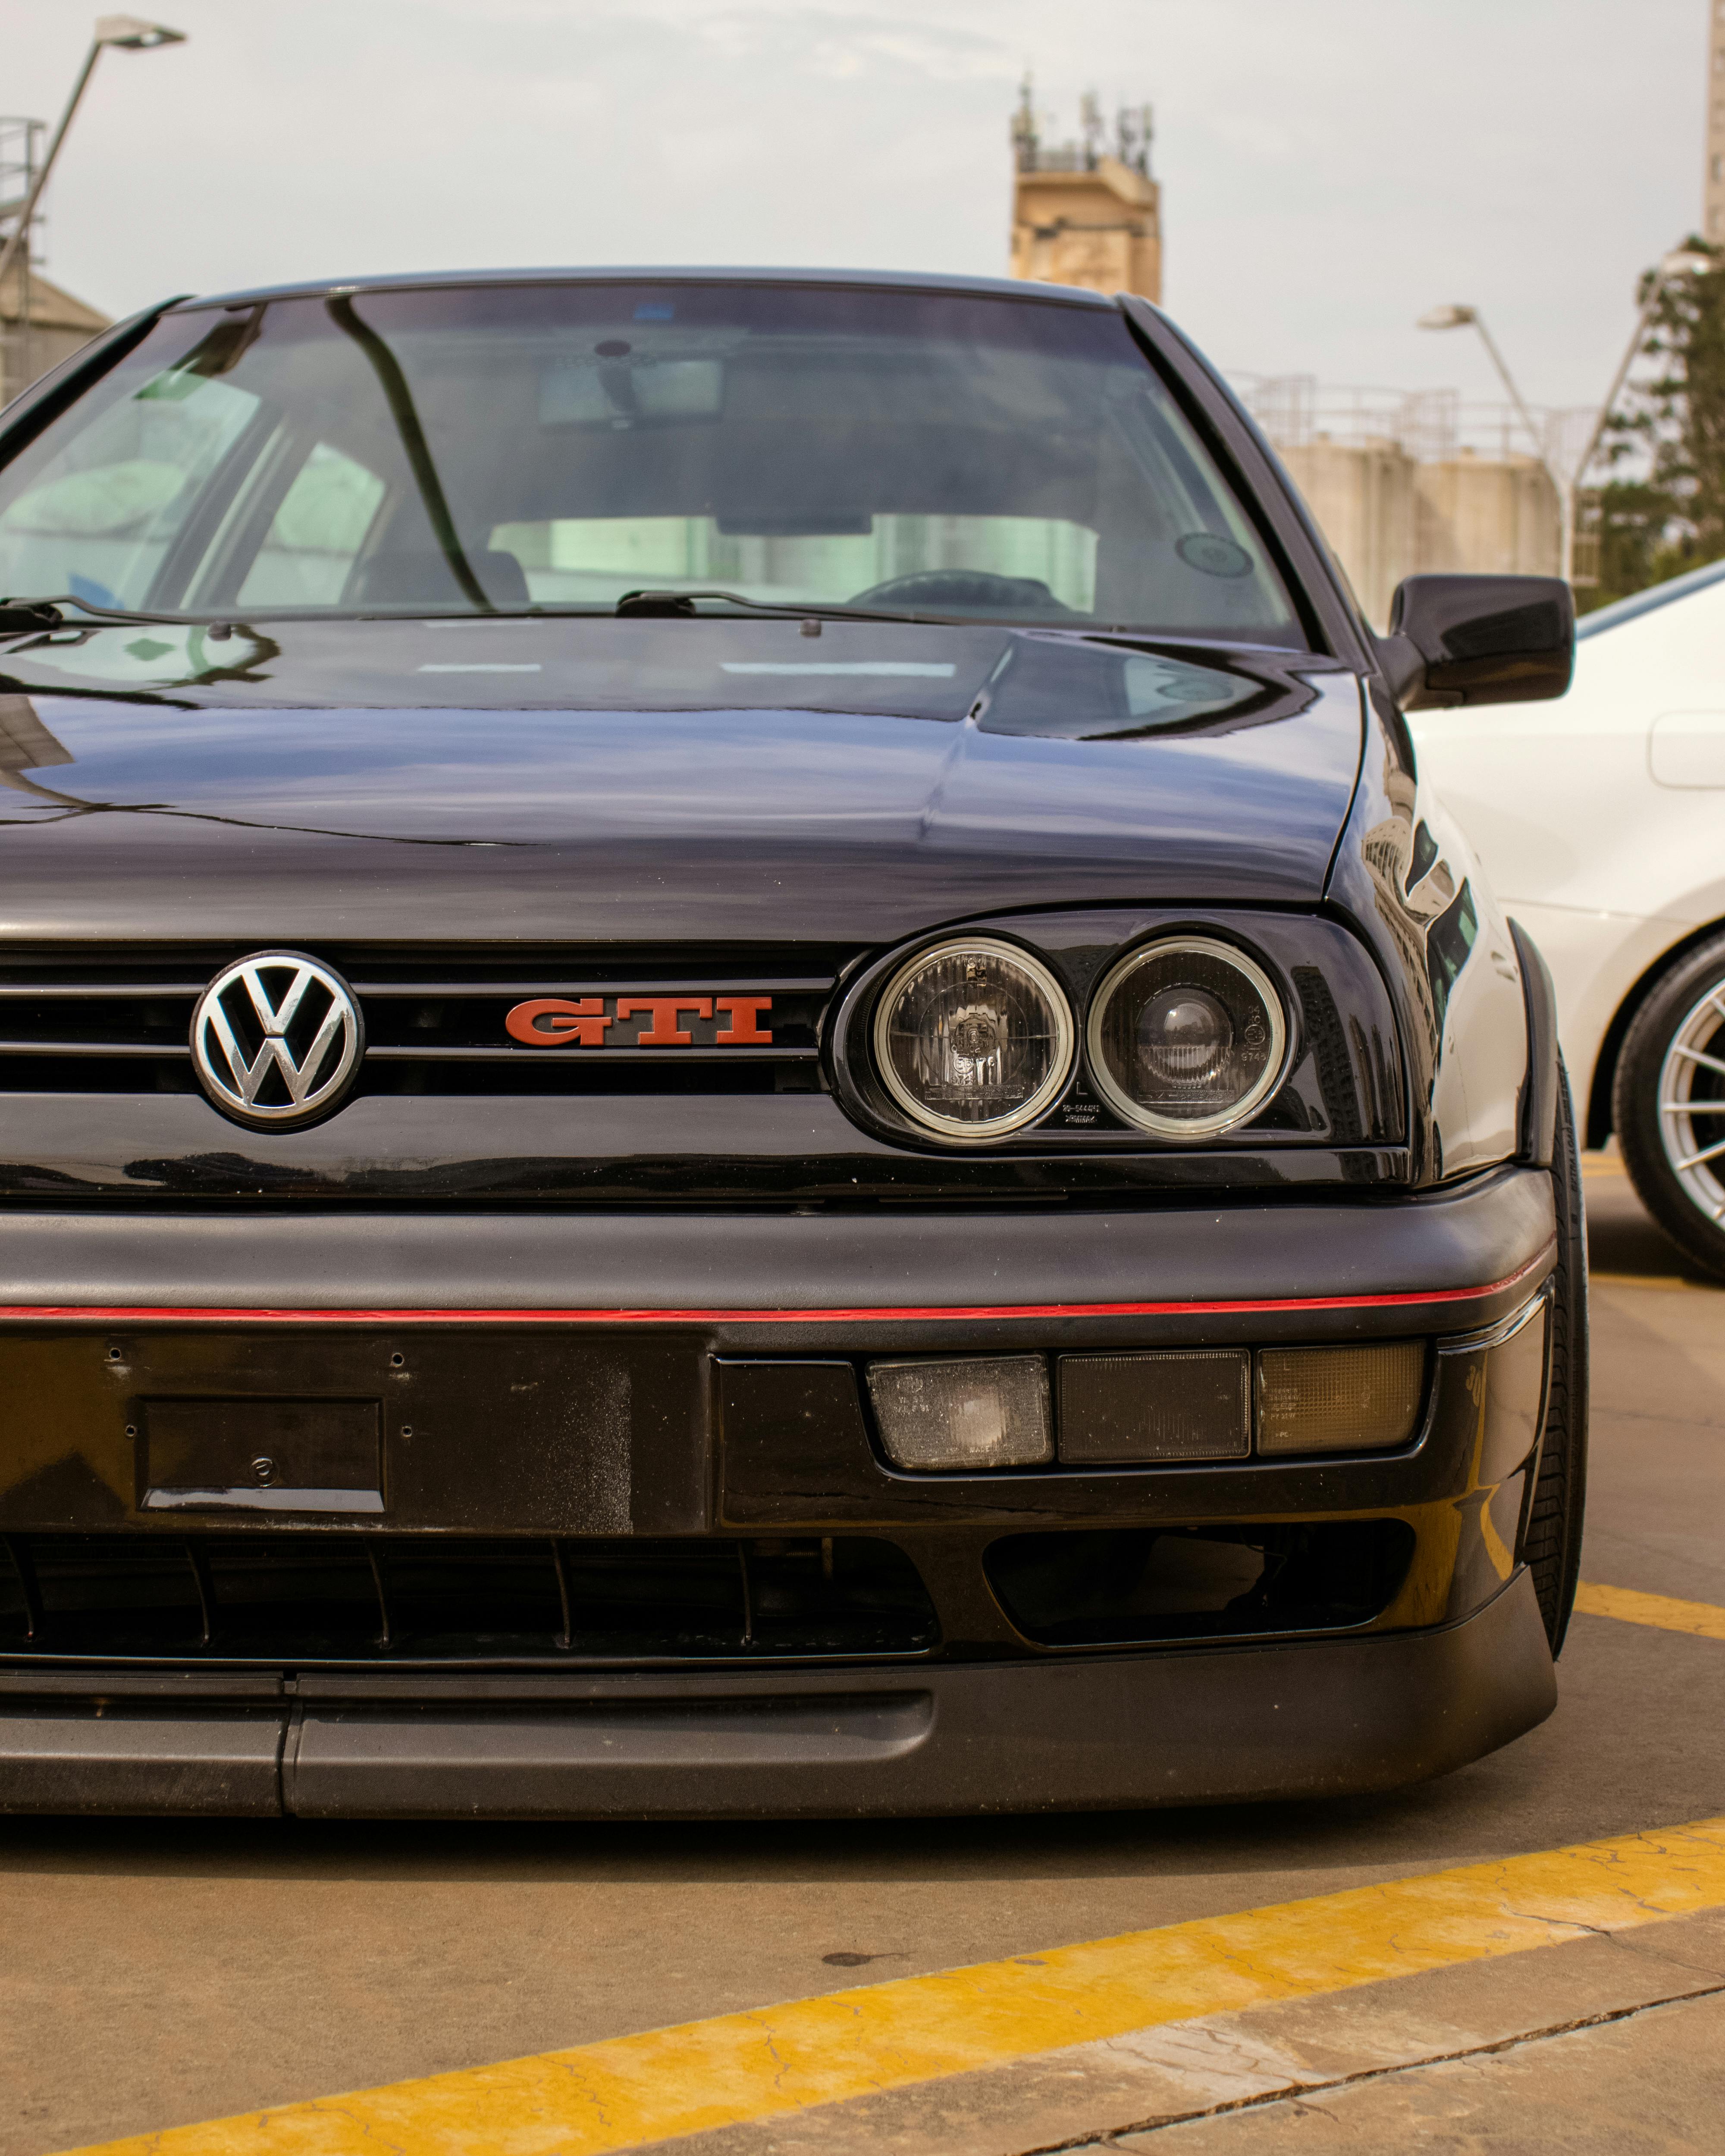 Golf Gti Photos, Download The BEST Free Golf Gti Stock Photos & HD Images